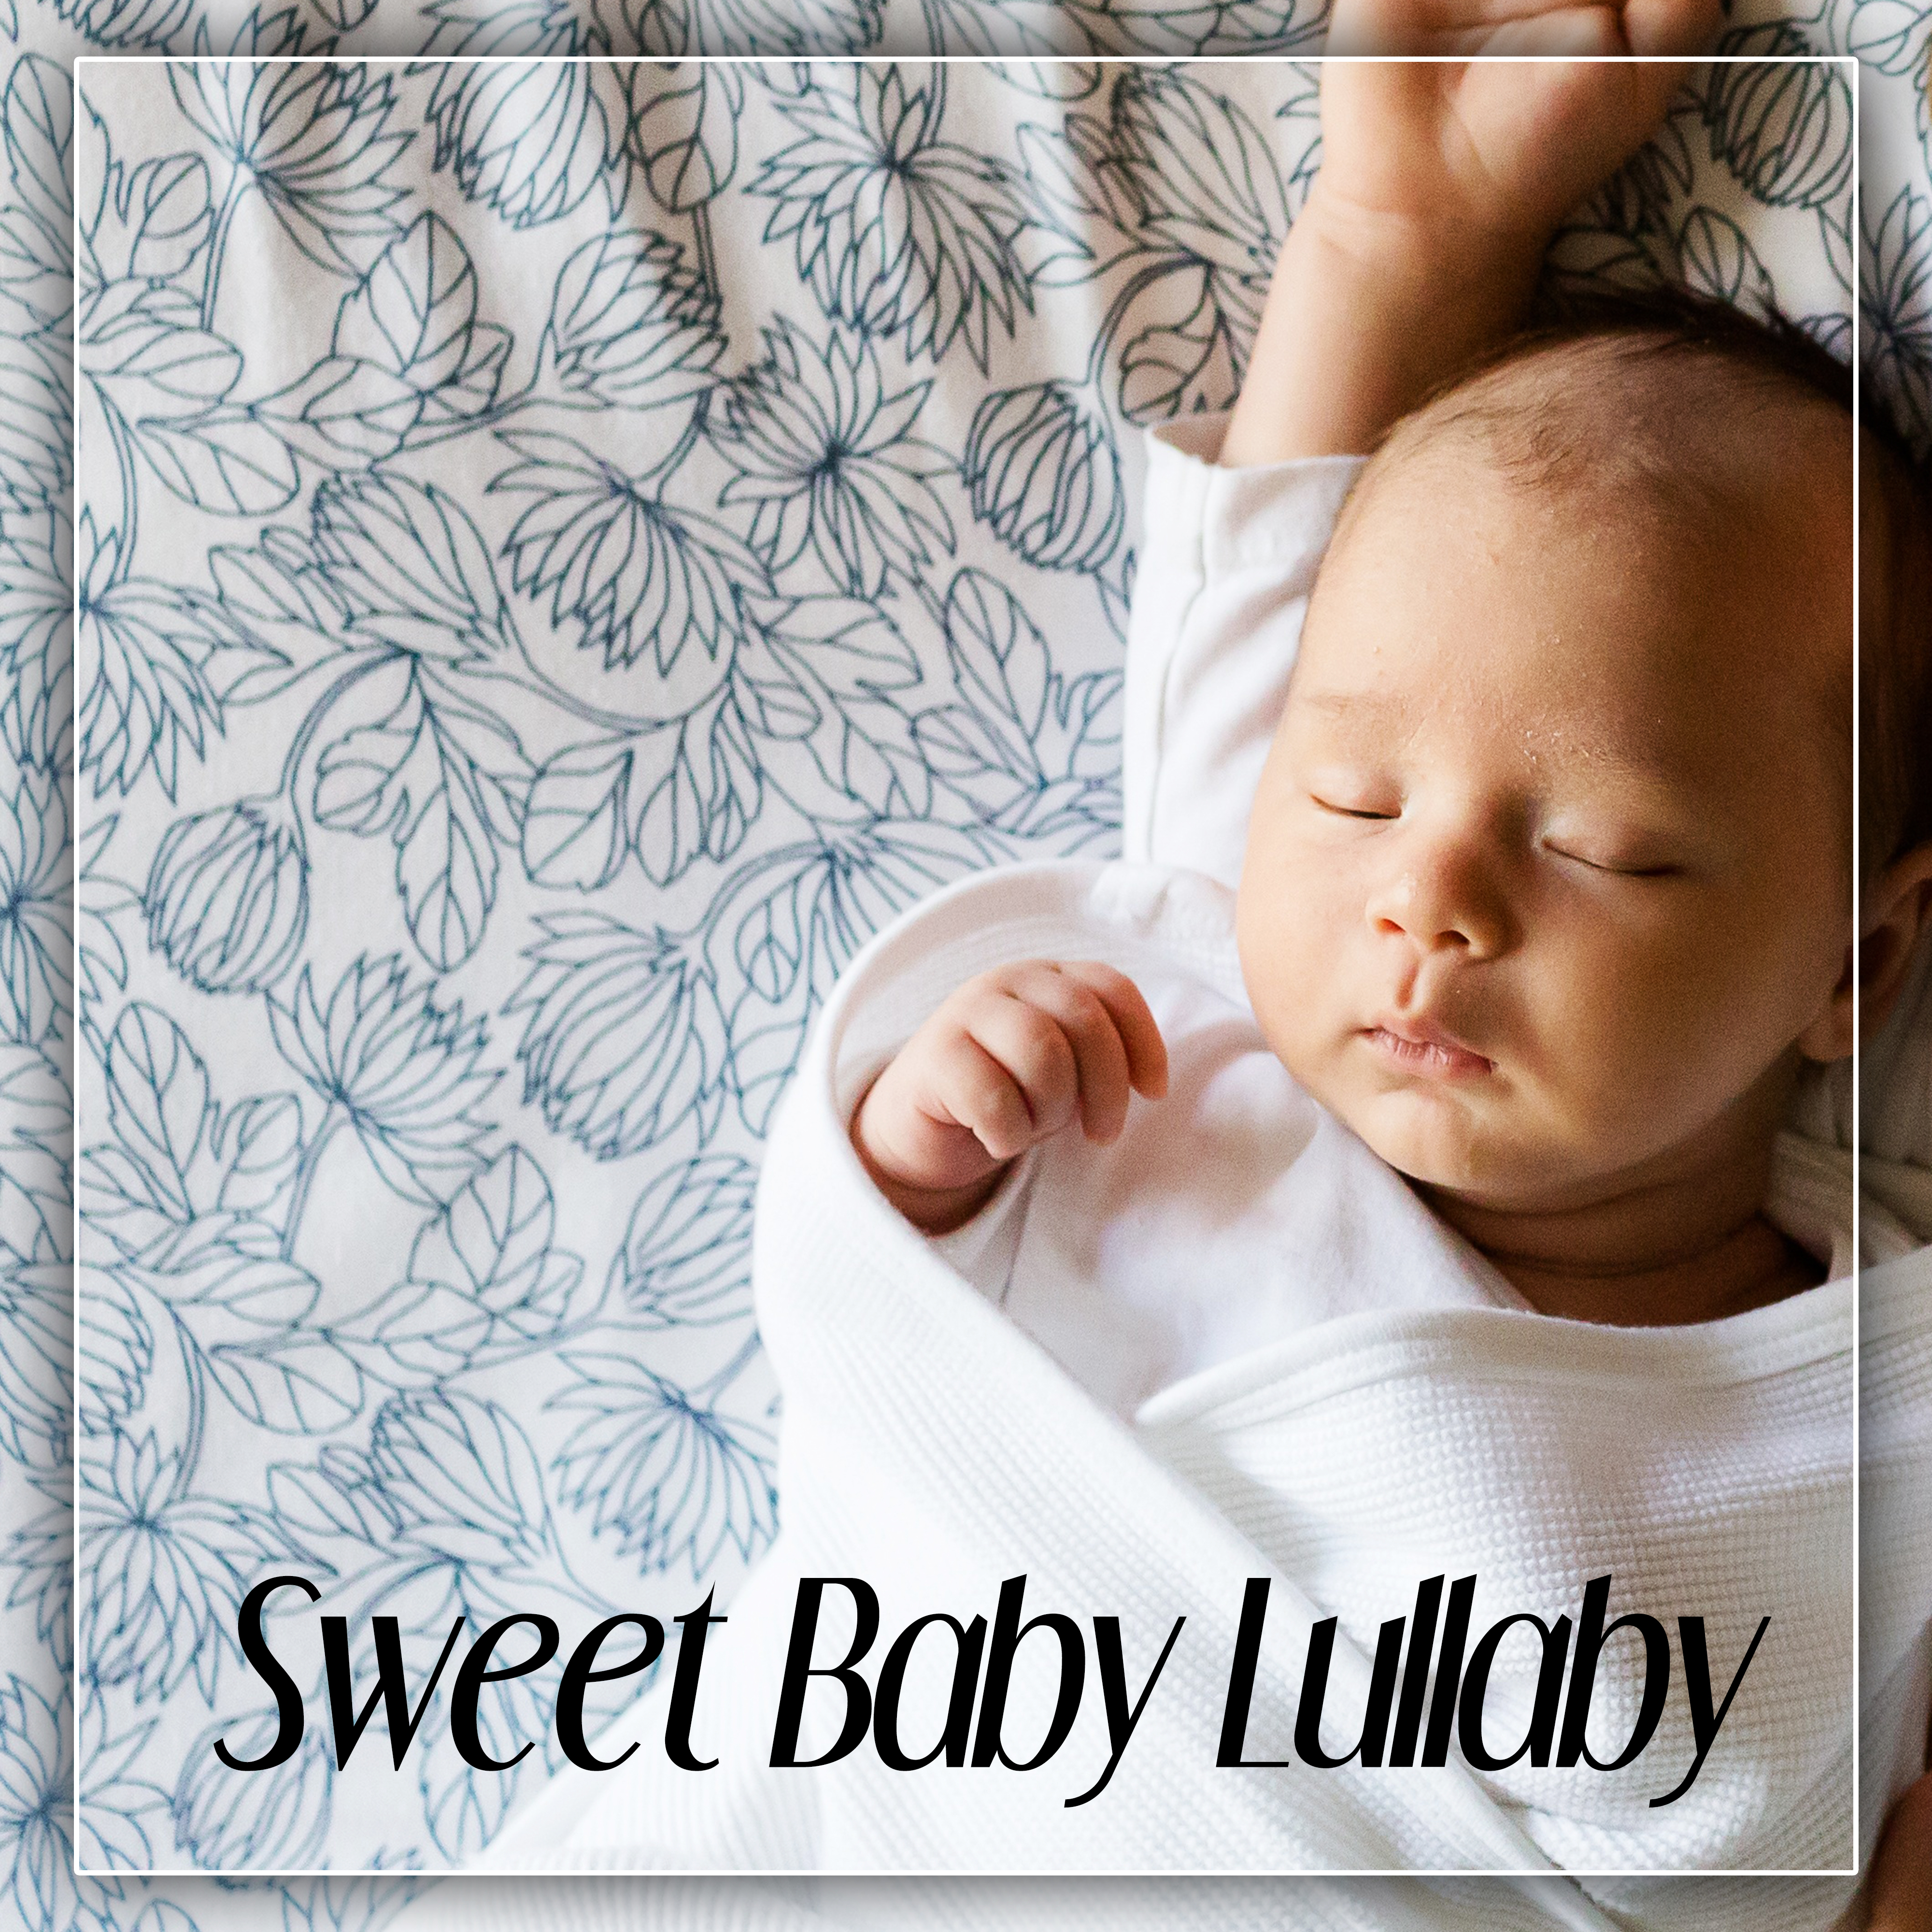 Sweet Baby Lullaby – Cradle Song for Toddlers, Sweet Lullaby, Peaceful Music for Sleep